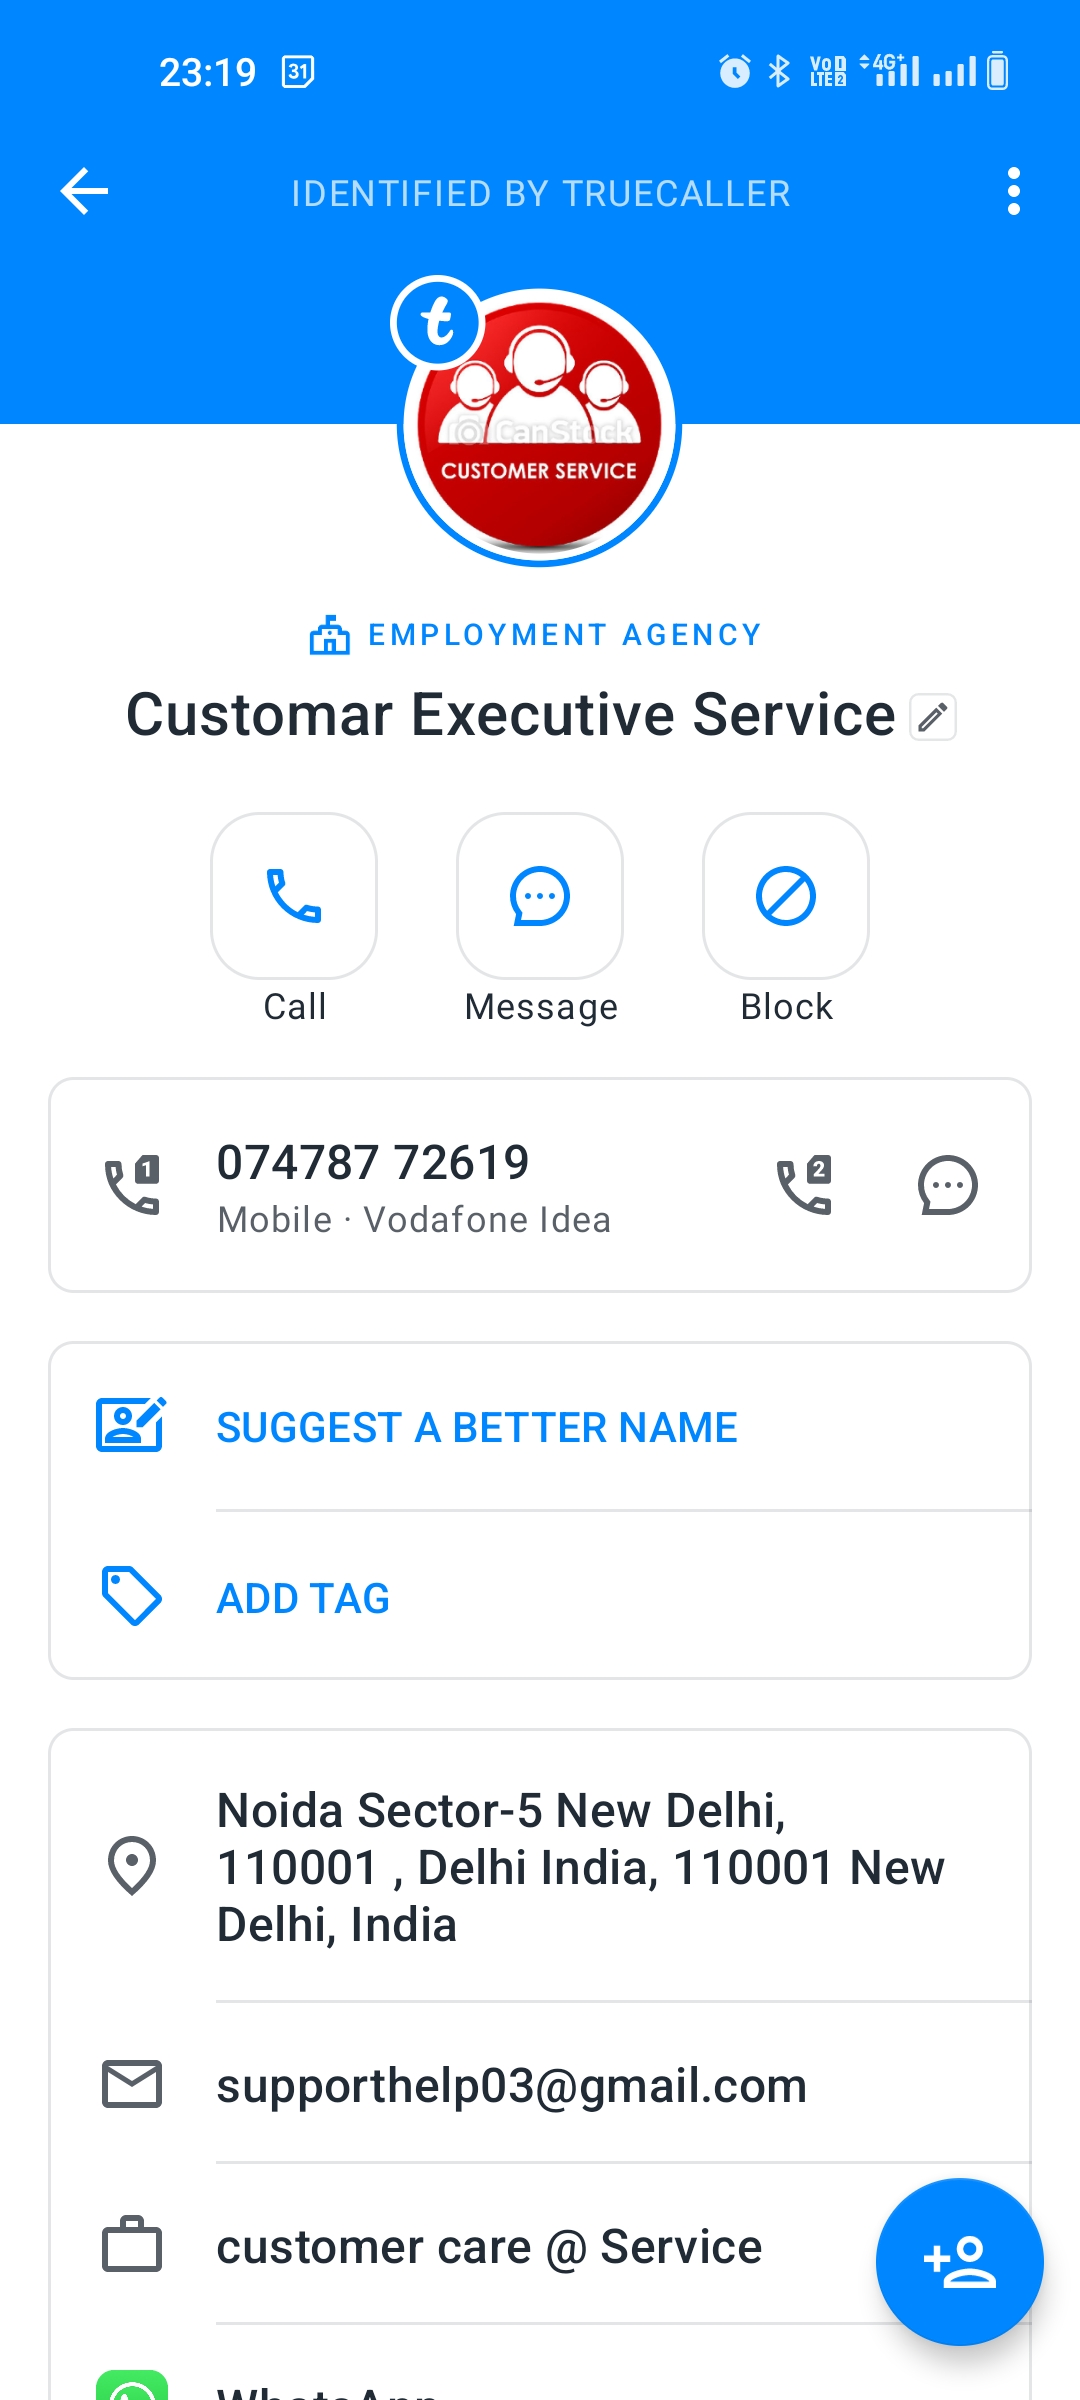 How this number shows in Truecaller